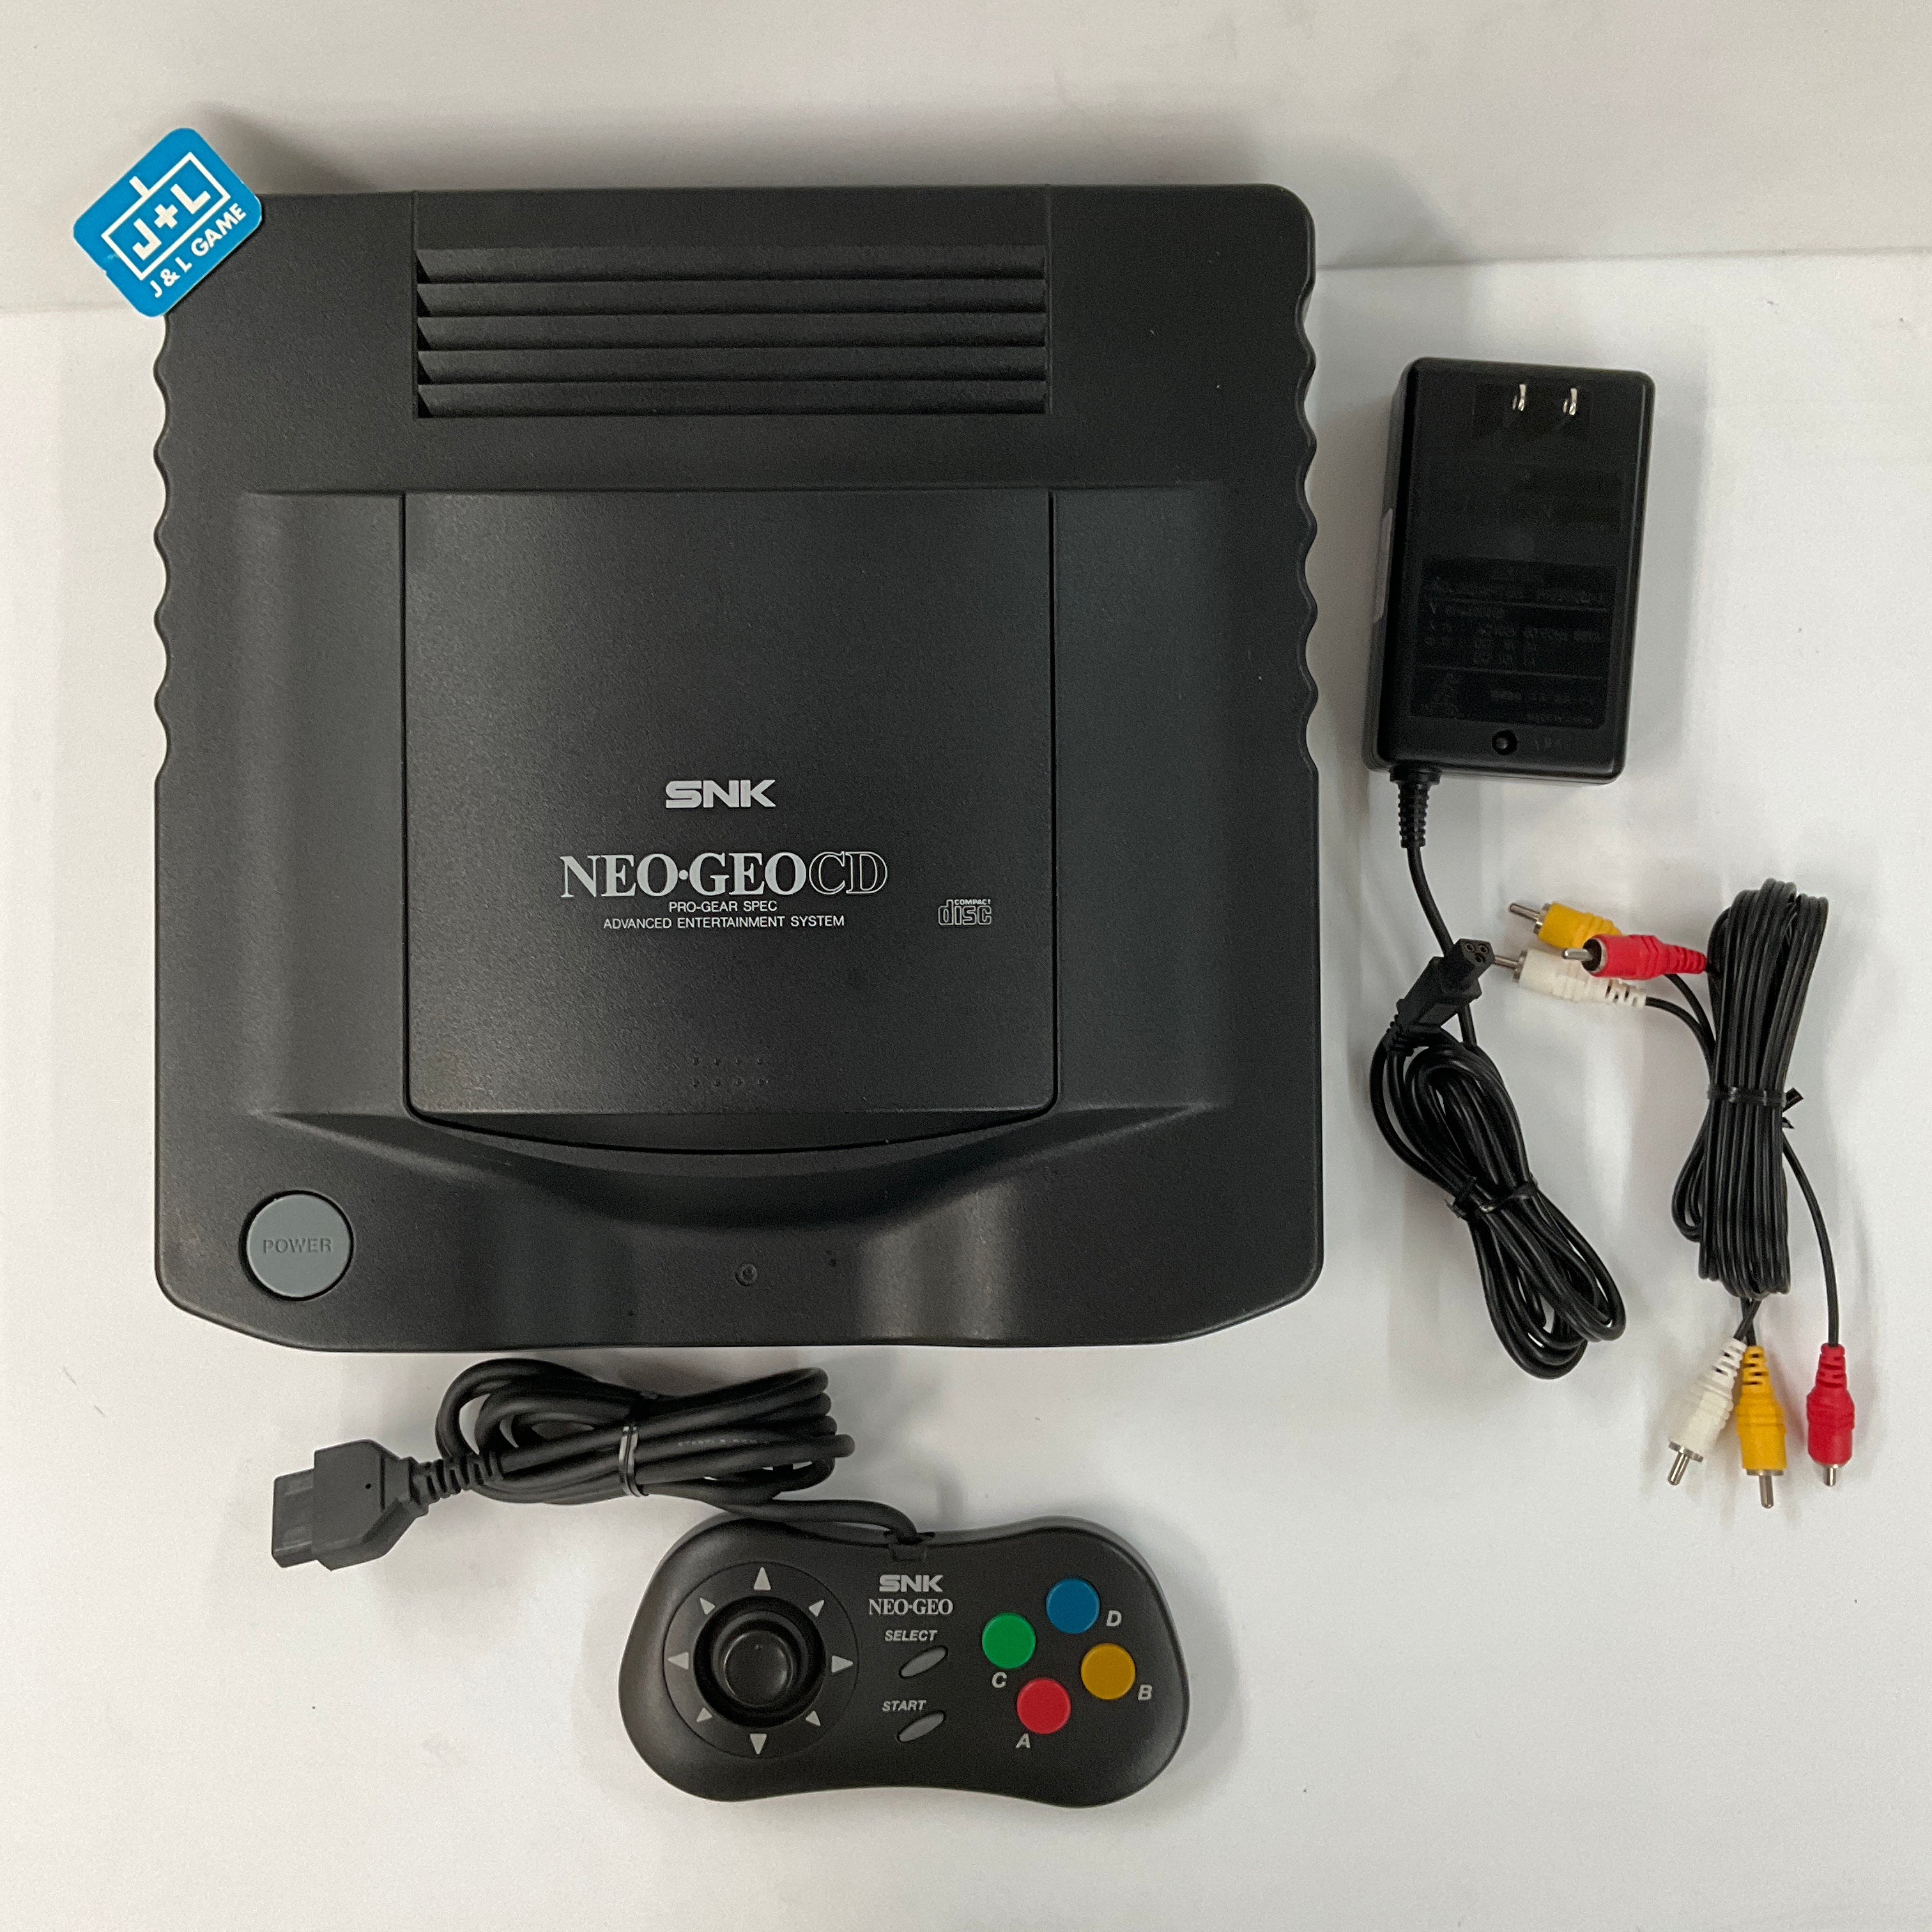 Neo Geo CD Console - SNK NeoGeo CD (Japanese Import) [Pre-Owned]